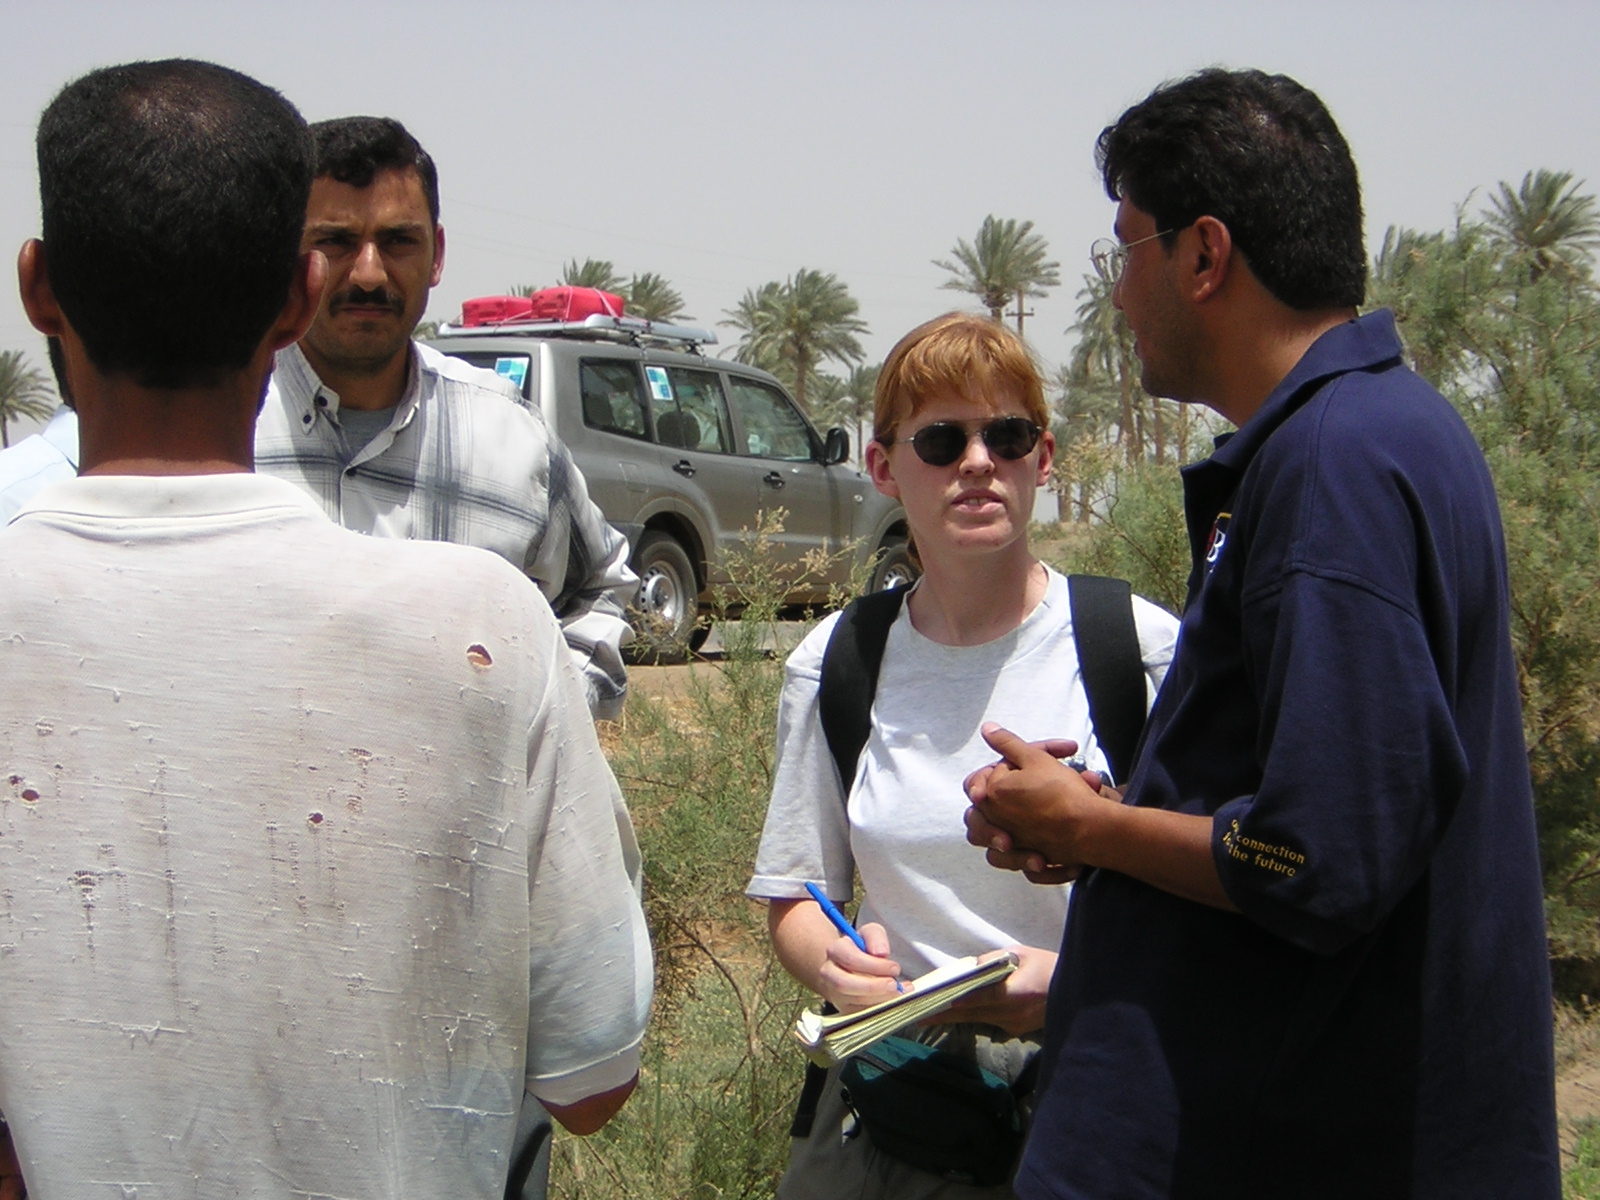 Docherty conducting interviews with Iraqis